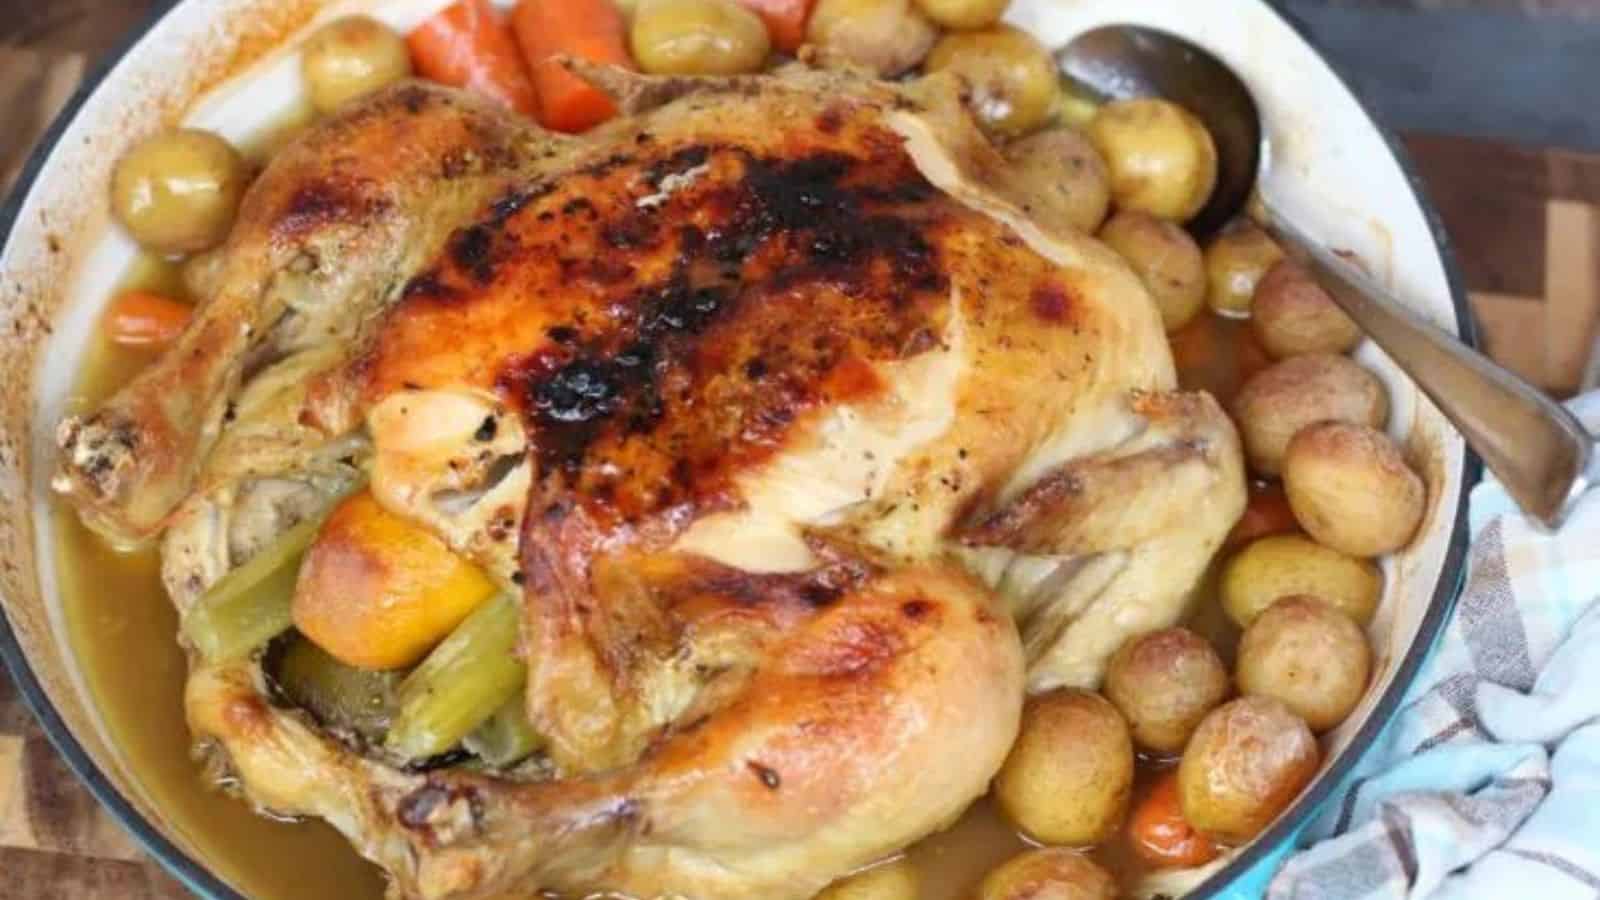 Roasted chicken and vegetables in a teal dish.